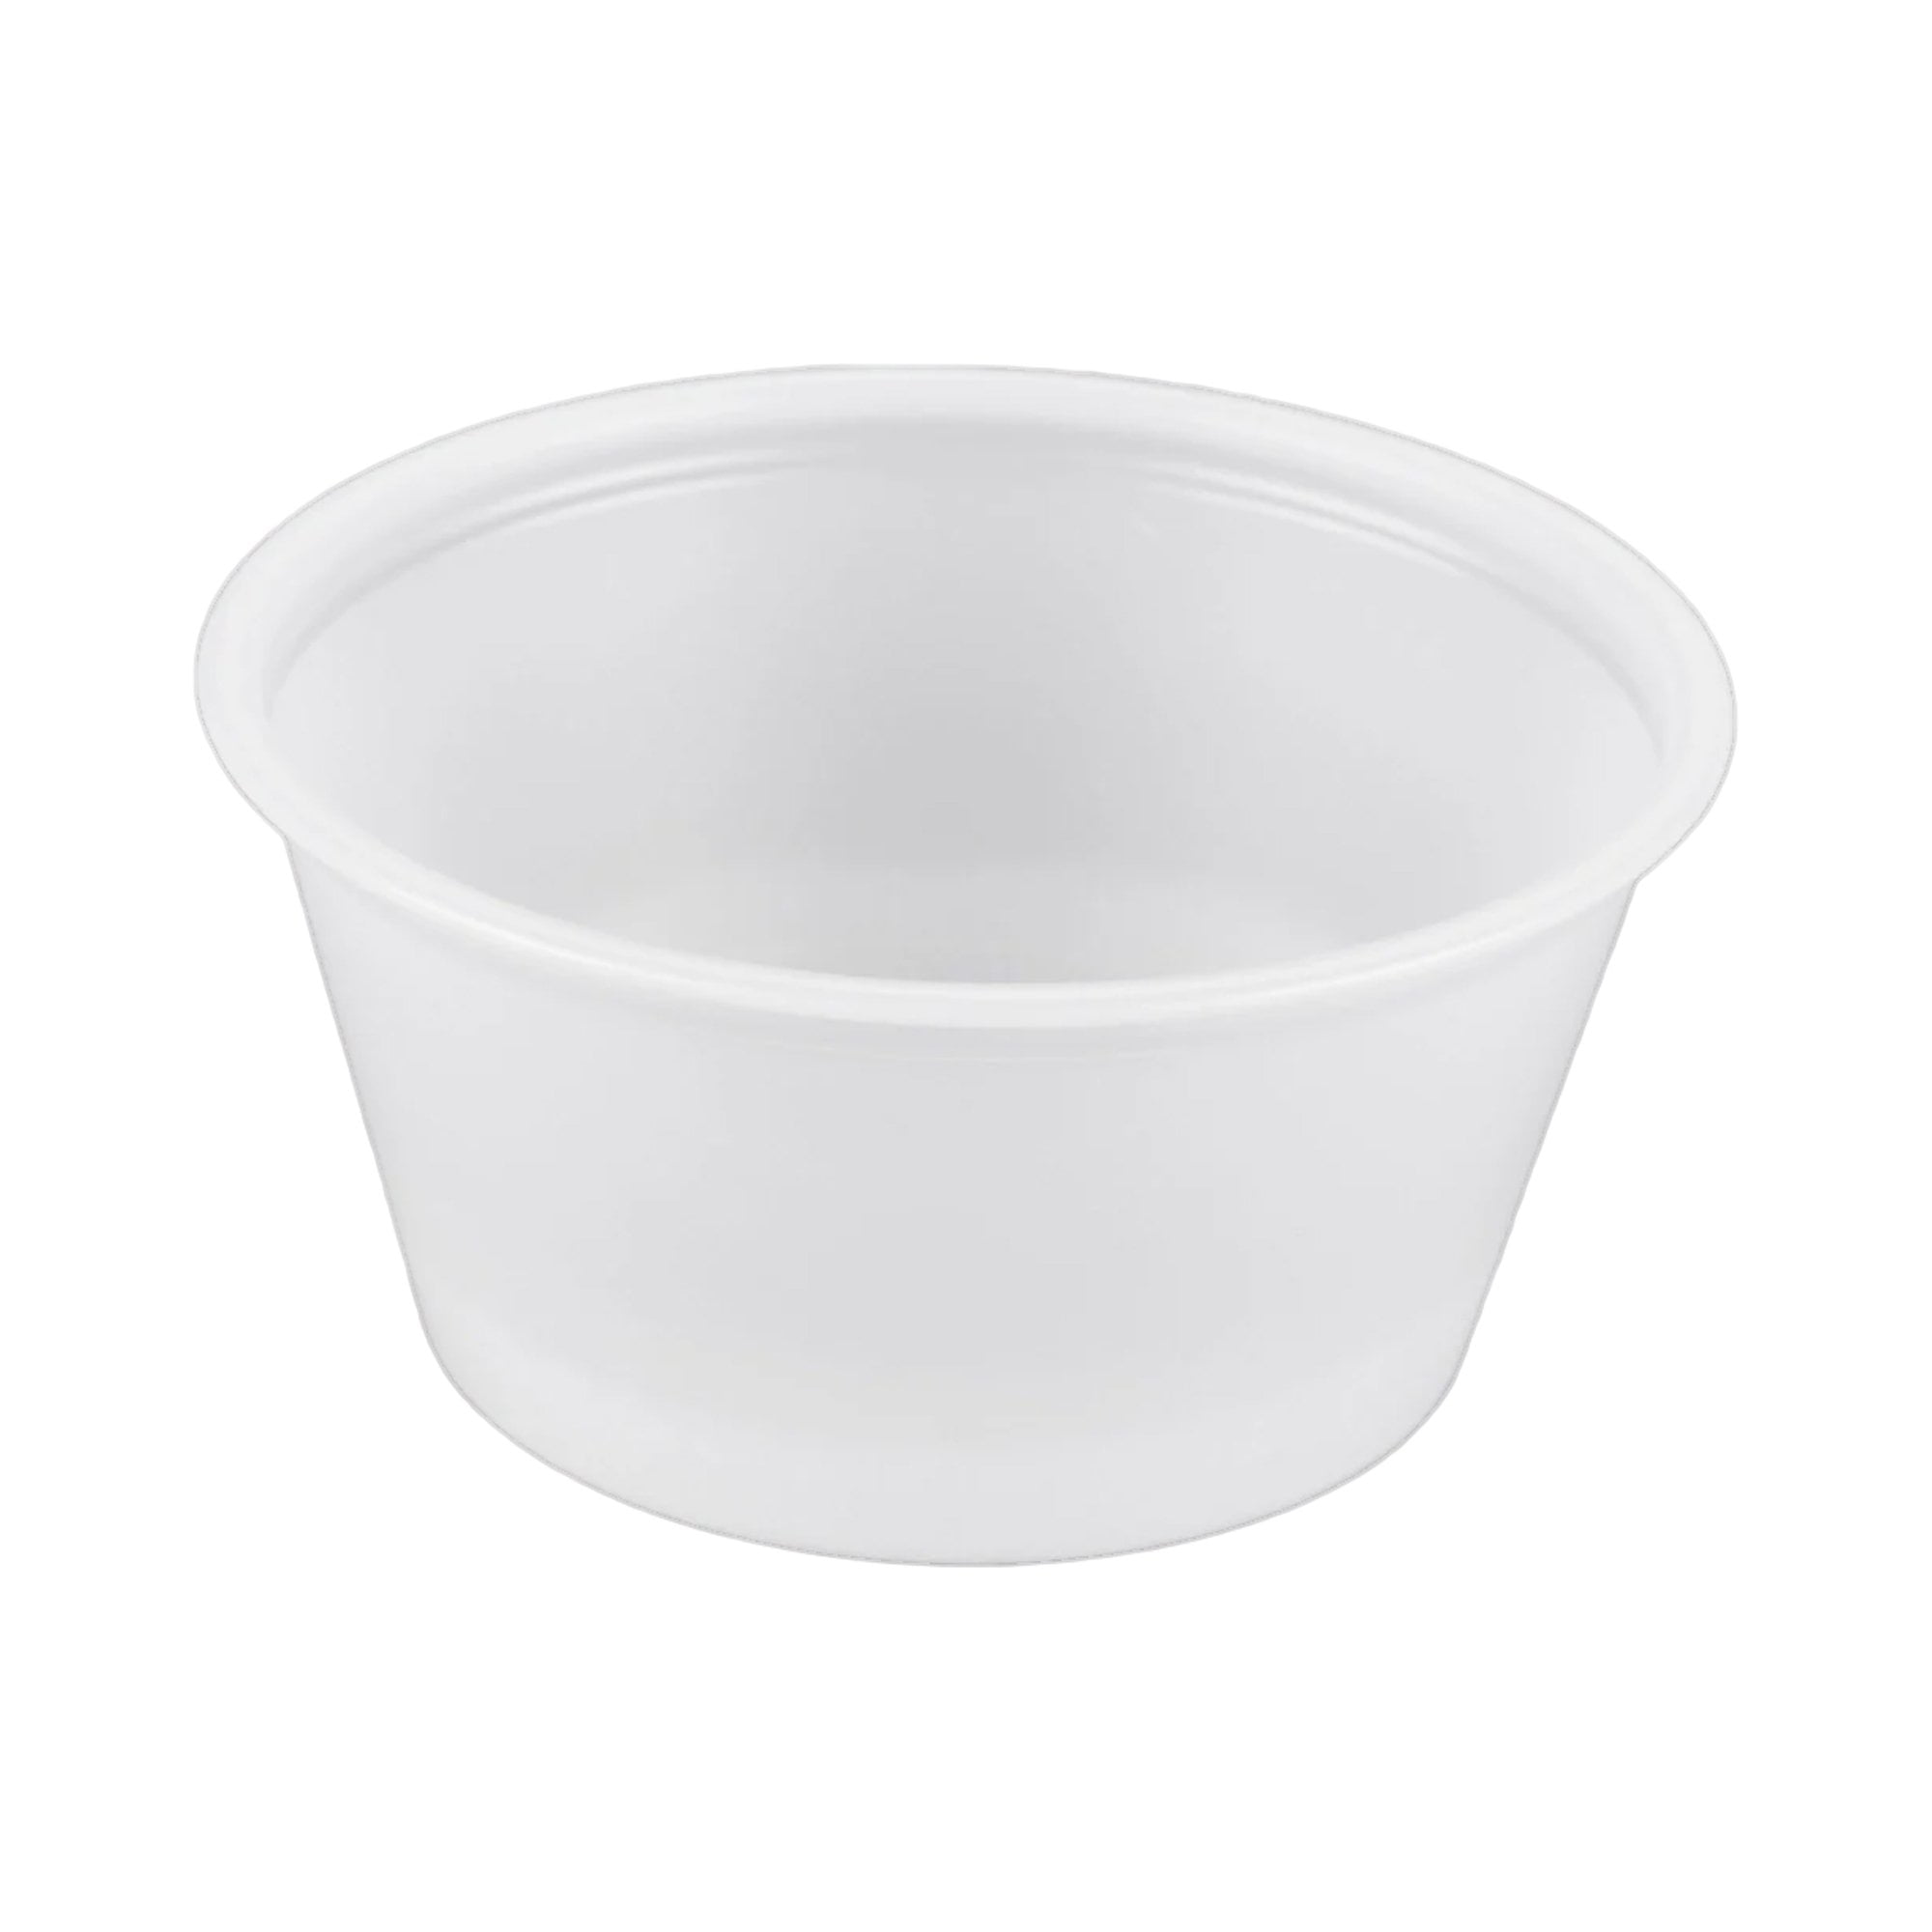 – Cup 250ct Solo 0.75 oz Portion Container & Lid 